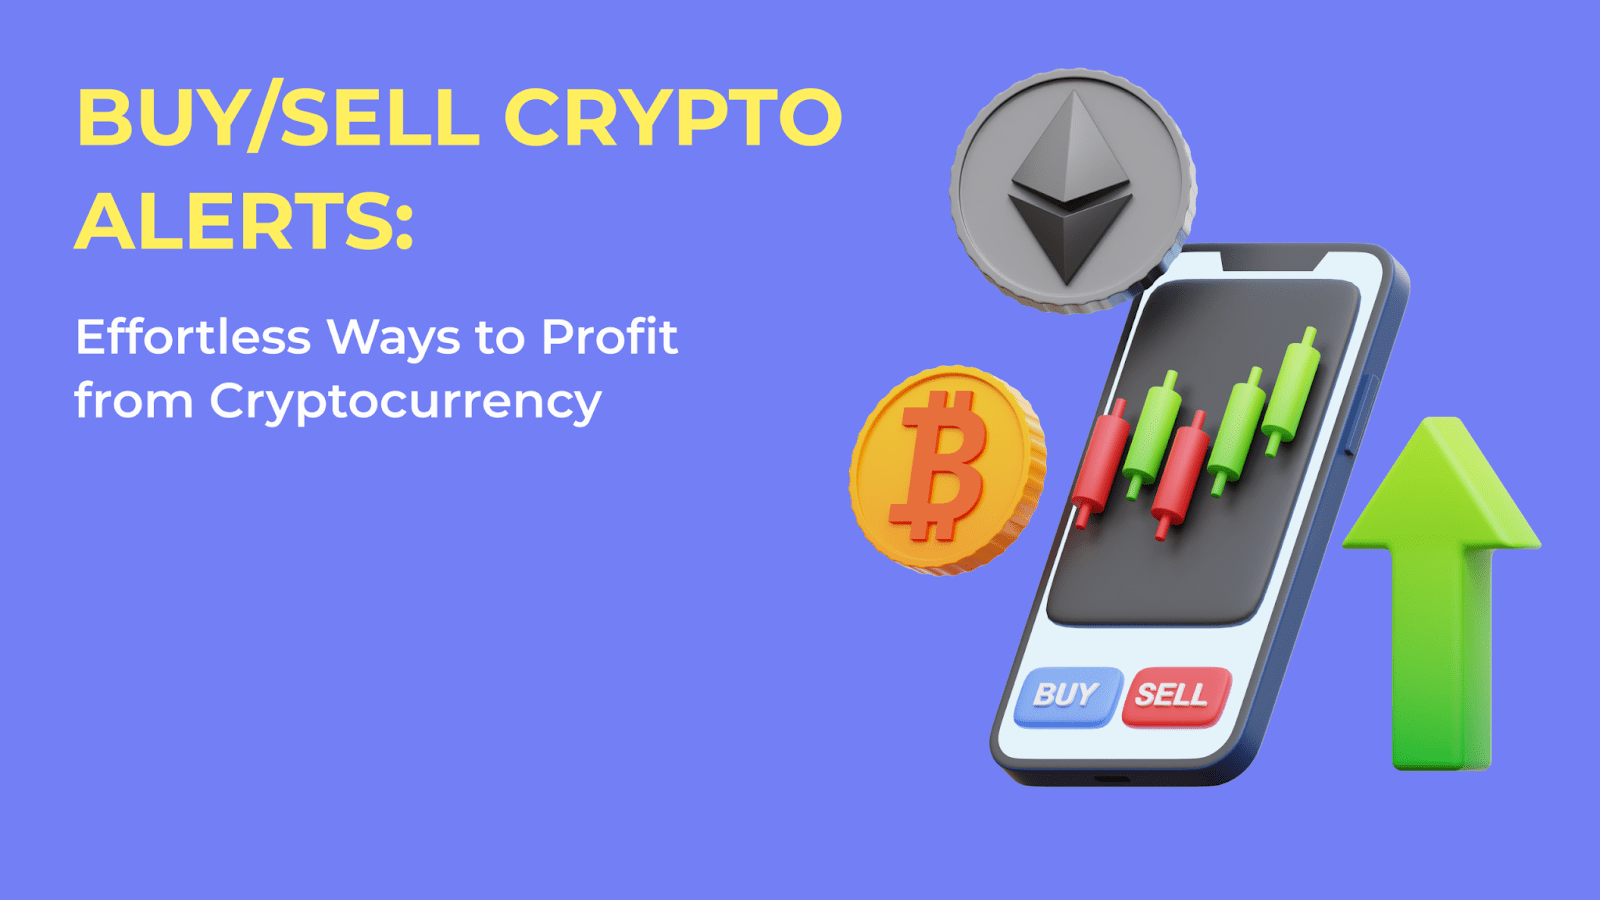 Buy/Sell Crypto Alerts: Easy ways to profit from crypto